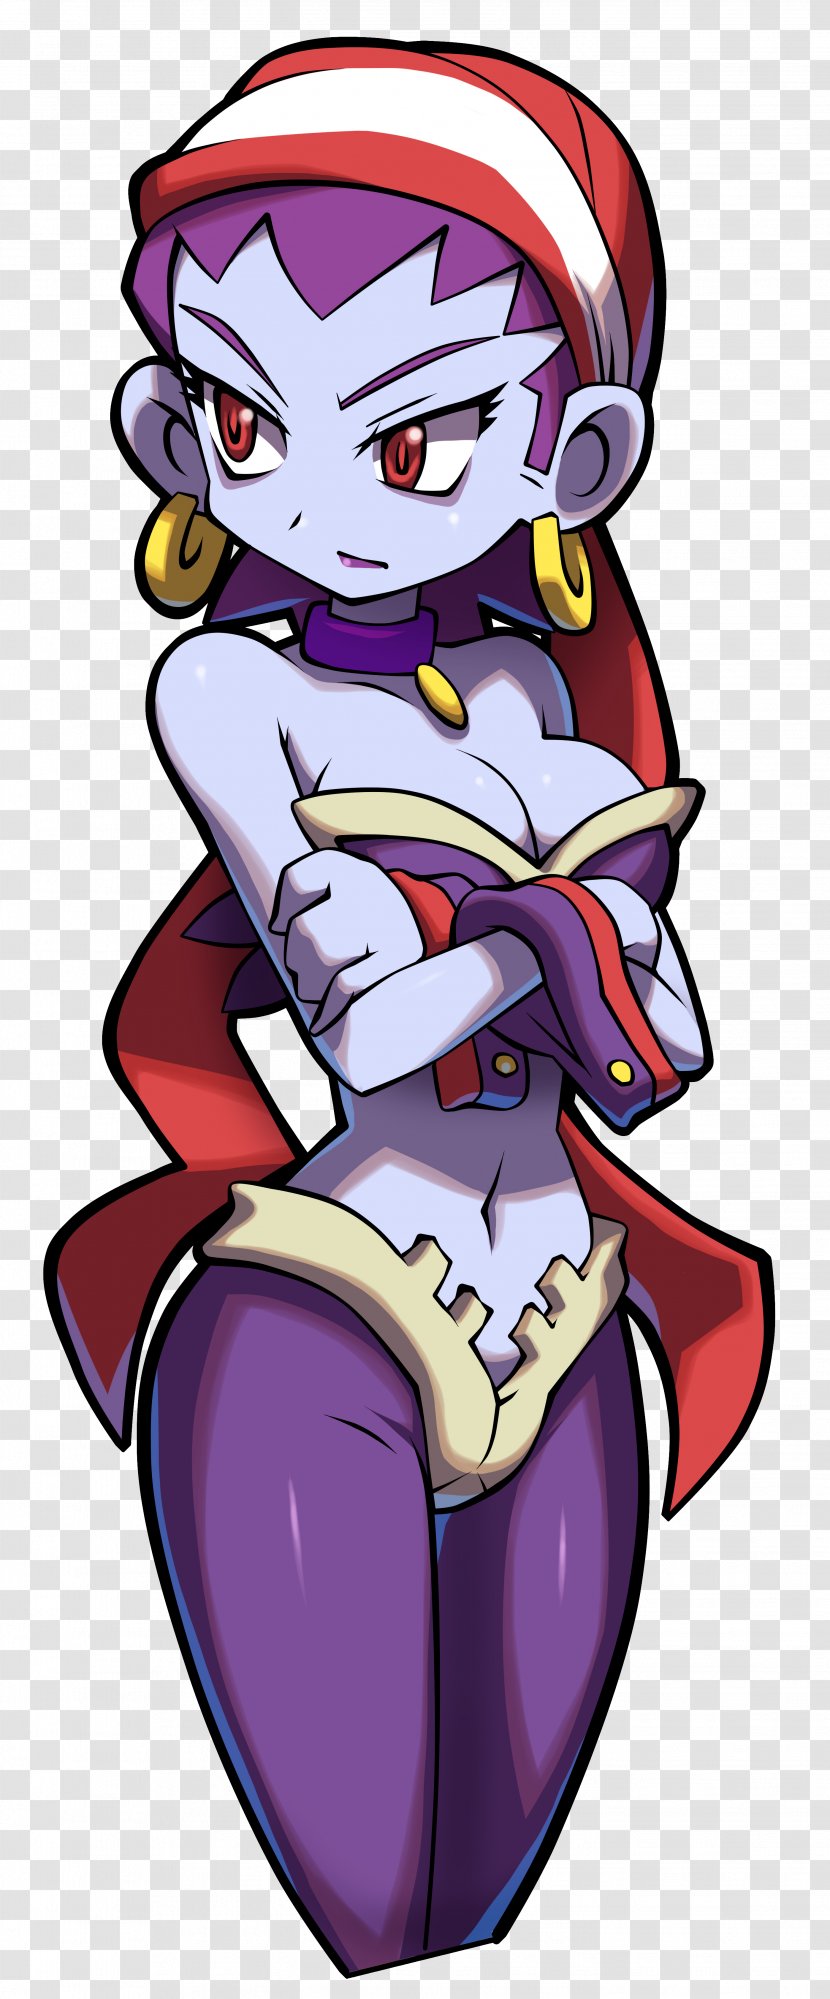 Shantae And The Pirate's Curse Wii U Nintendo 3DS Illustration North America - Watercolor Transparent PNG